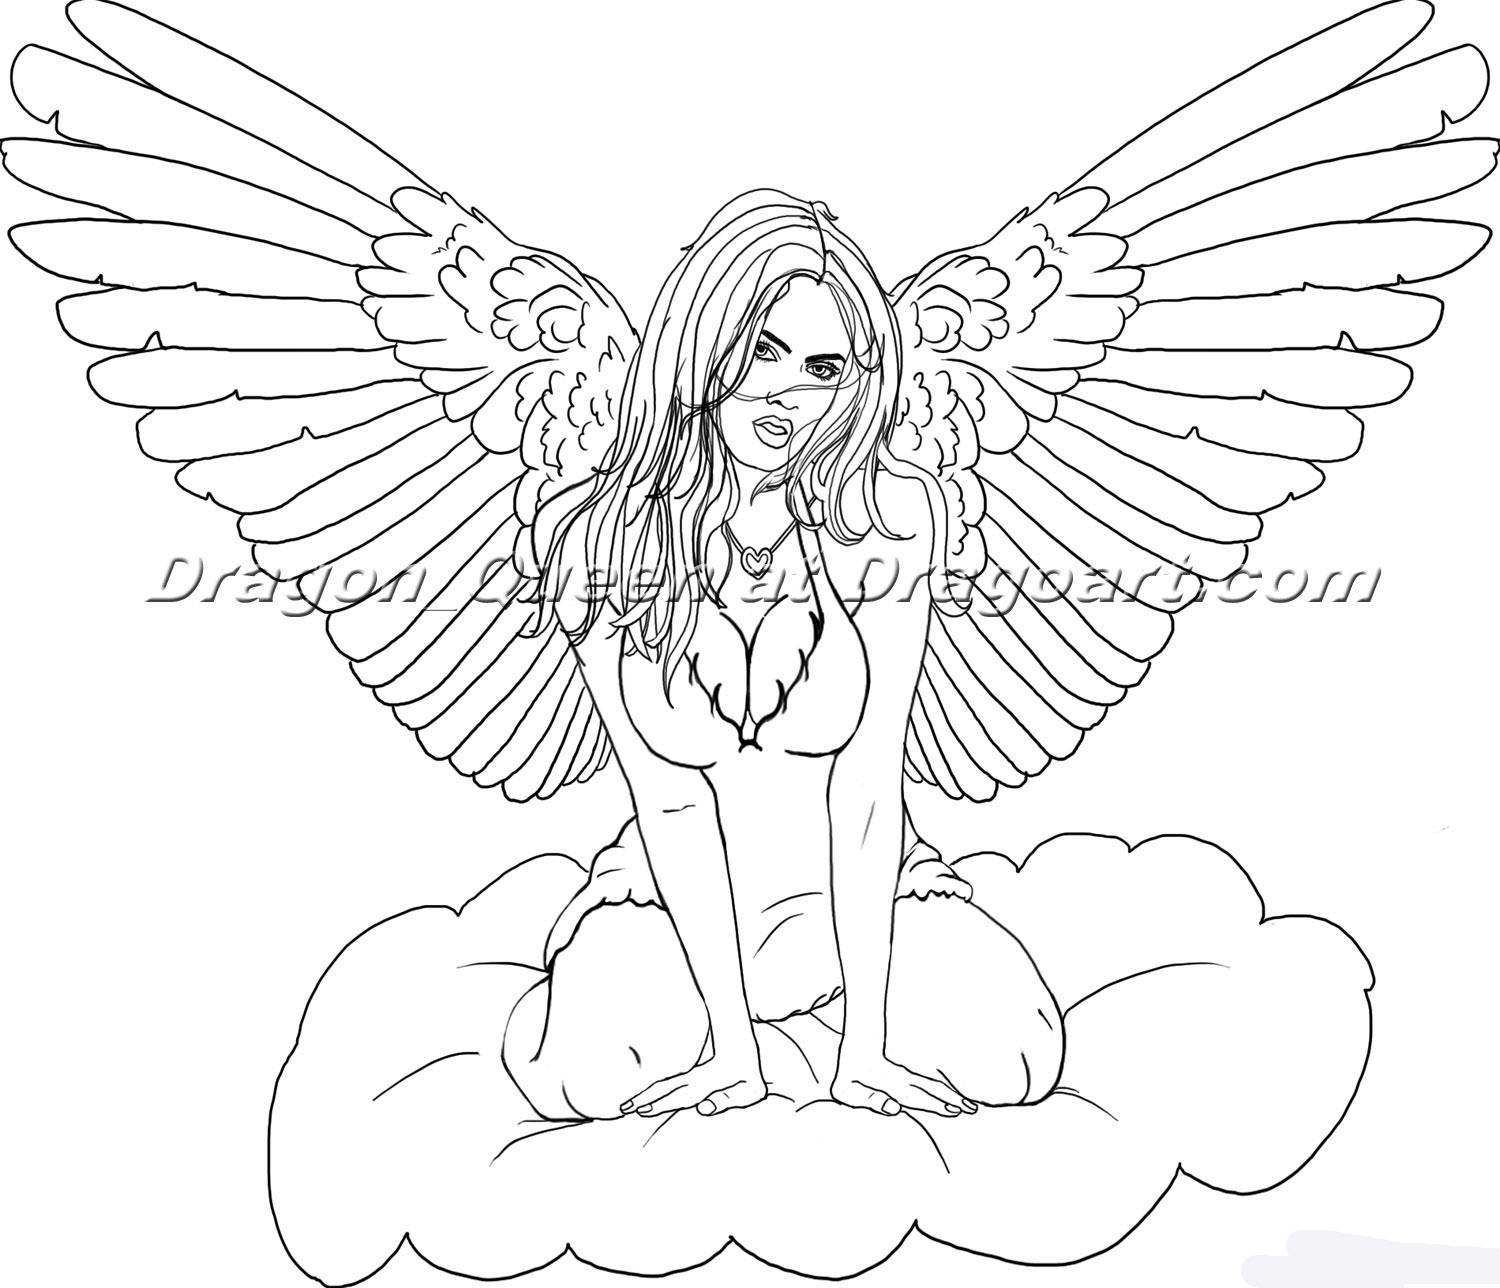 how-to-draw-an-angel-step-6_1_000000004667_5